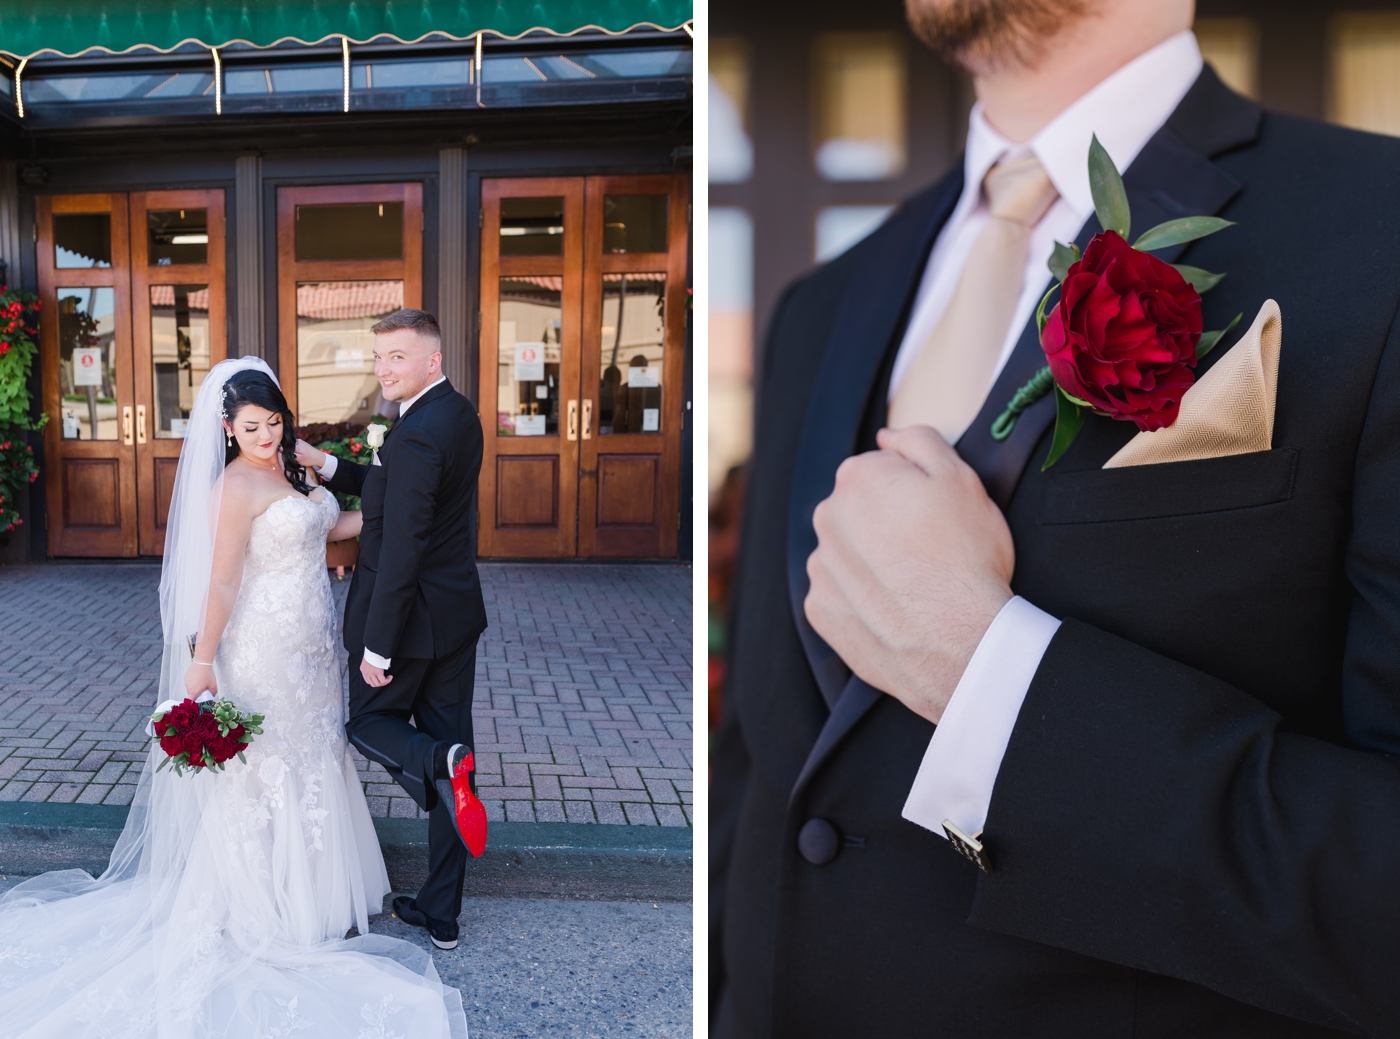 Classic black, white and red wedding in Parkersburg West Virginia